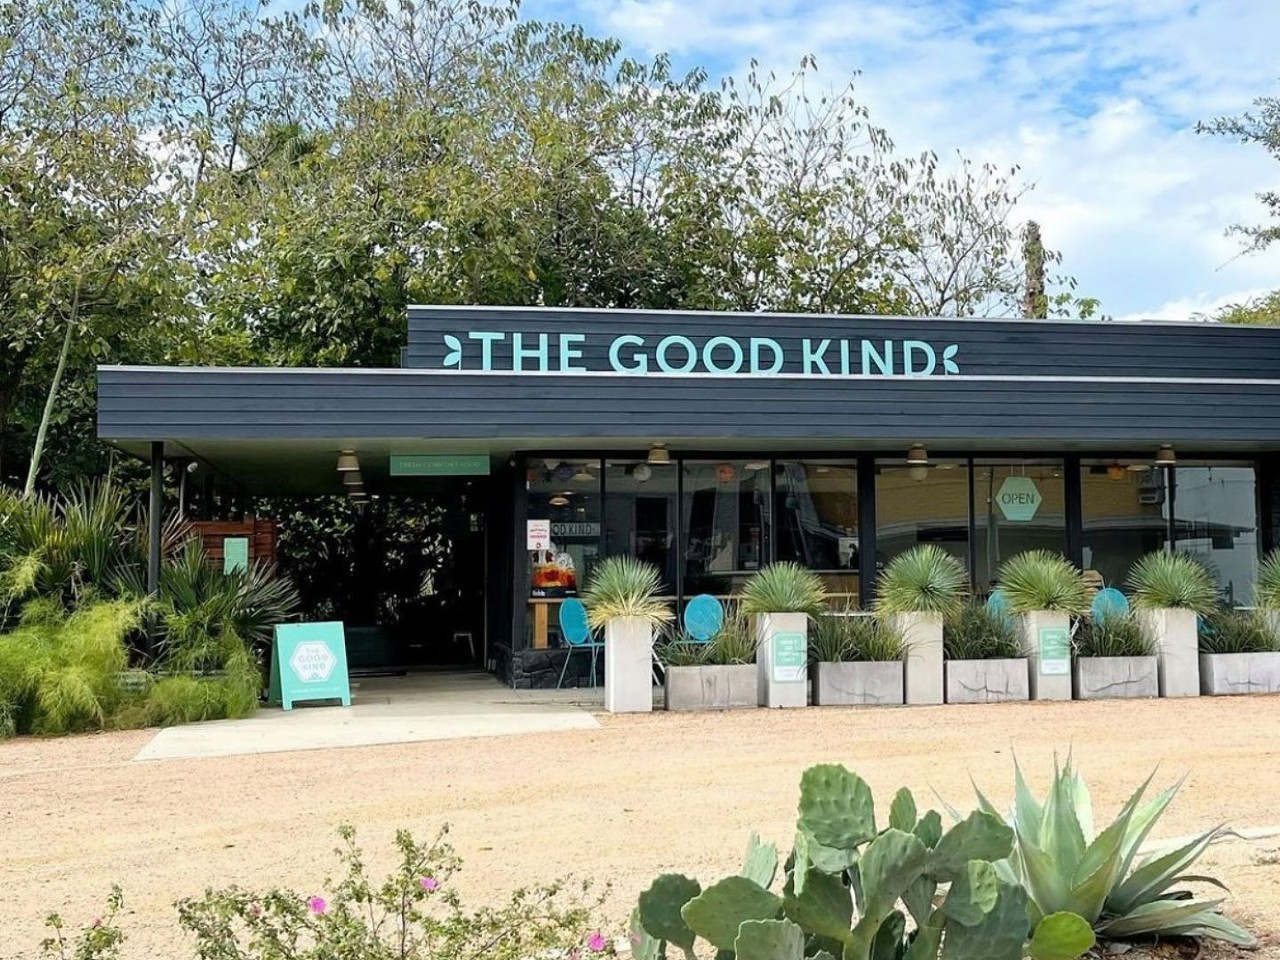 The Good Kind
1127 S. St. Mary's St., (210) 801-5892, eatgoodkind.com
The Good Kind’s picturesque outdoor garden is open for patrons to eat and drink while the sun beams down. While guests sip their cocktails or craft beers, they can enjoy various events that The Good Kind hosts in its outdoor space, from live music to dance parties and film screenings.